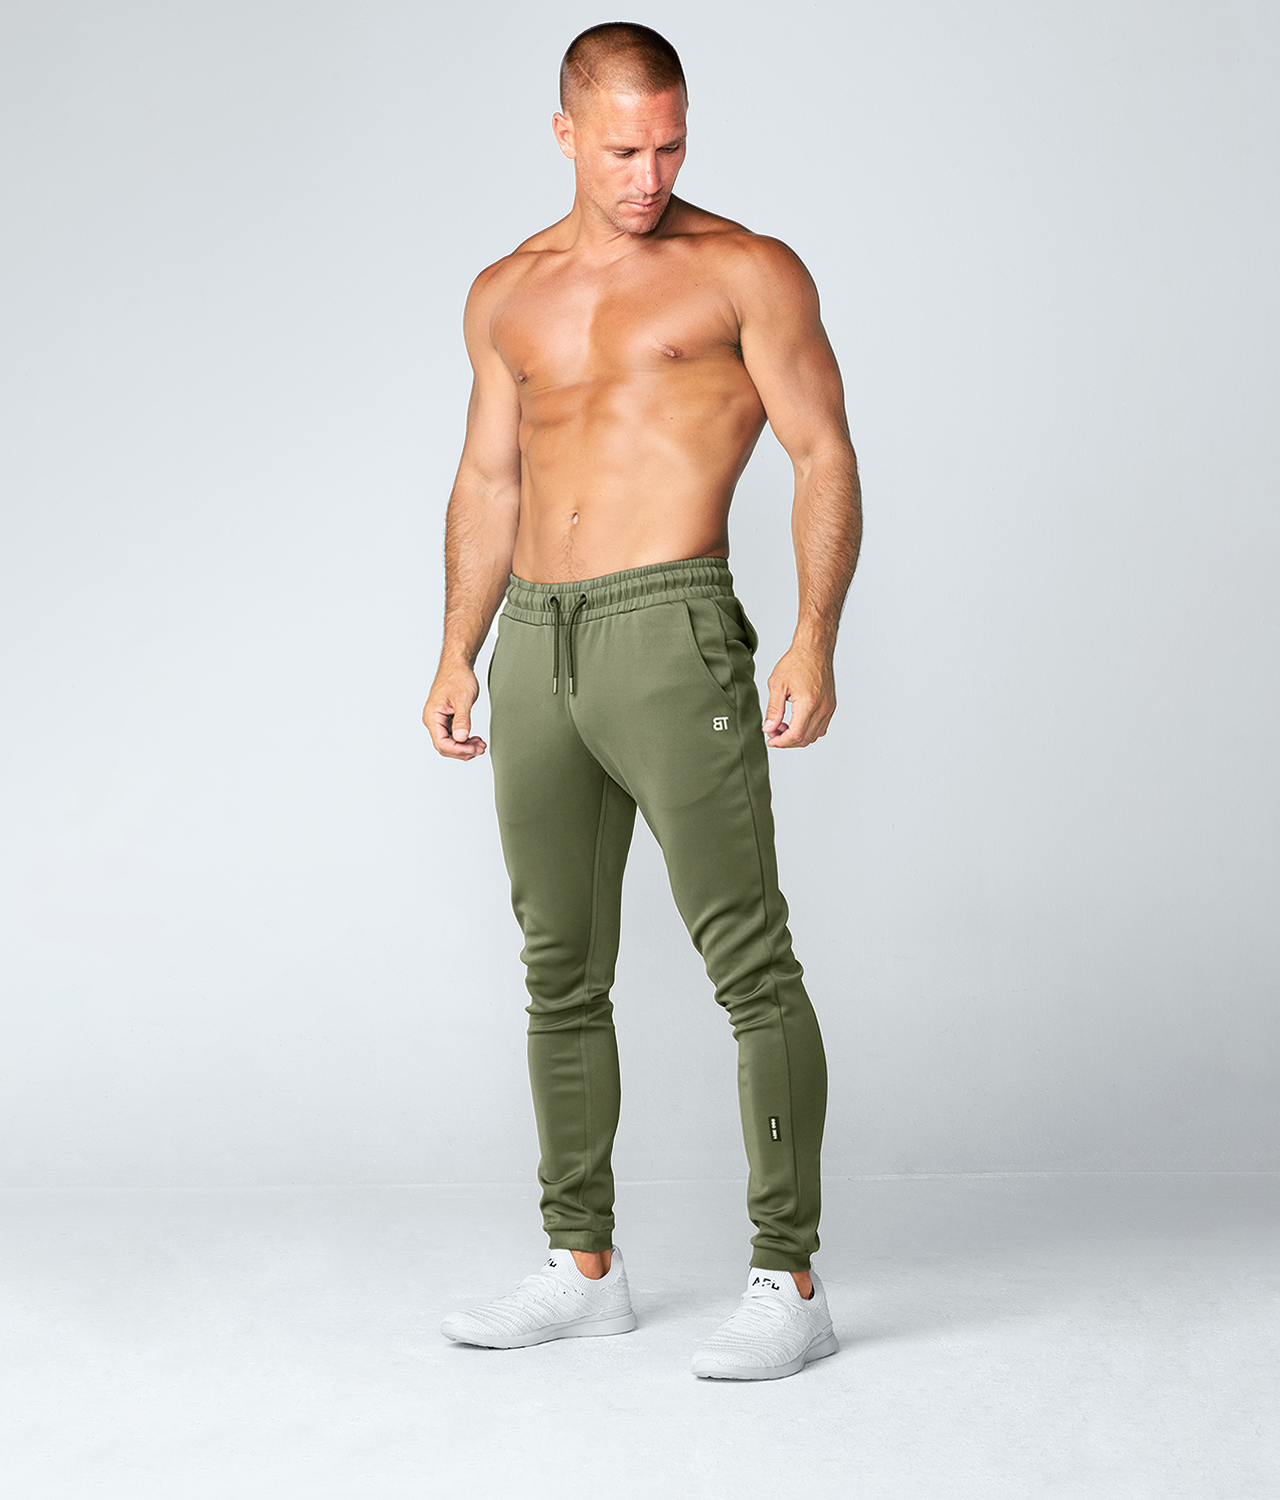 Born Tough Momentum Fitted Cargo Gym Workout Jogger Pants for Men